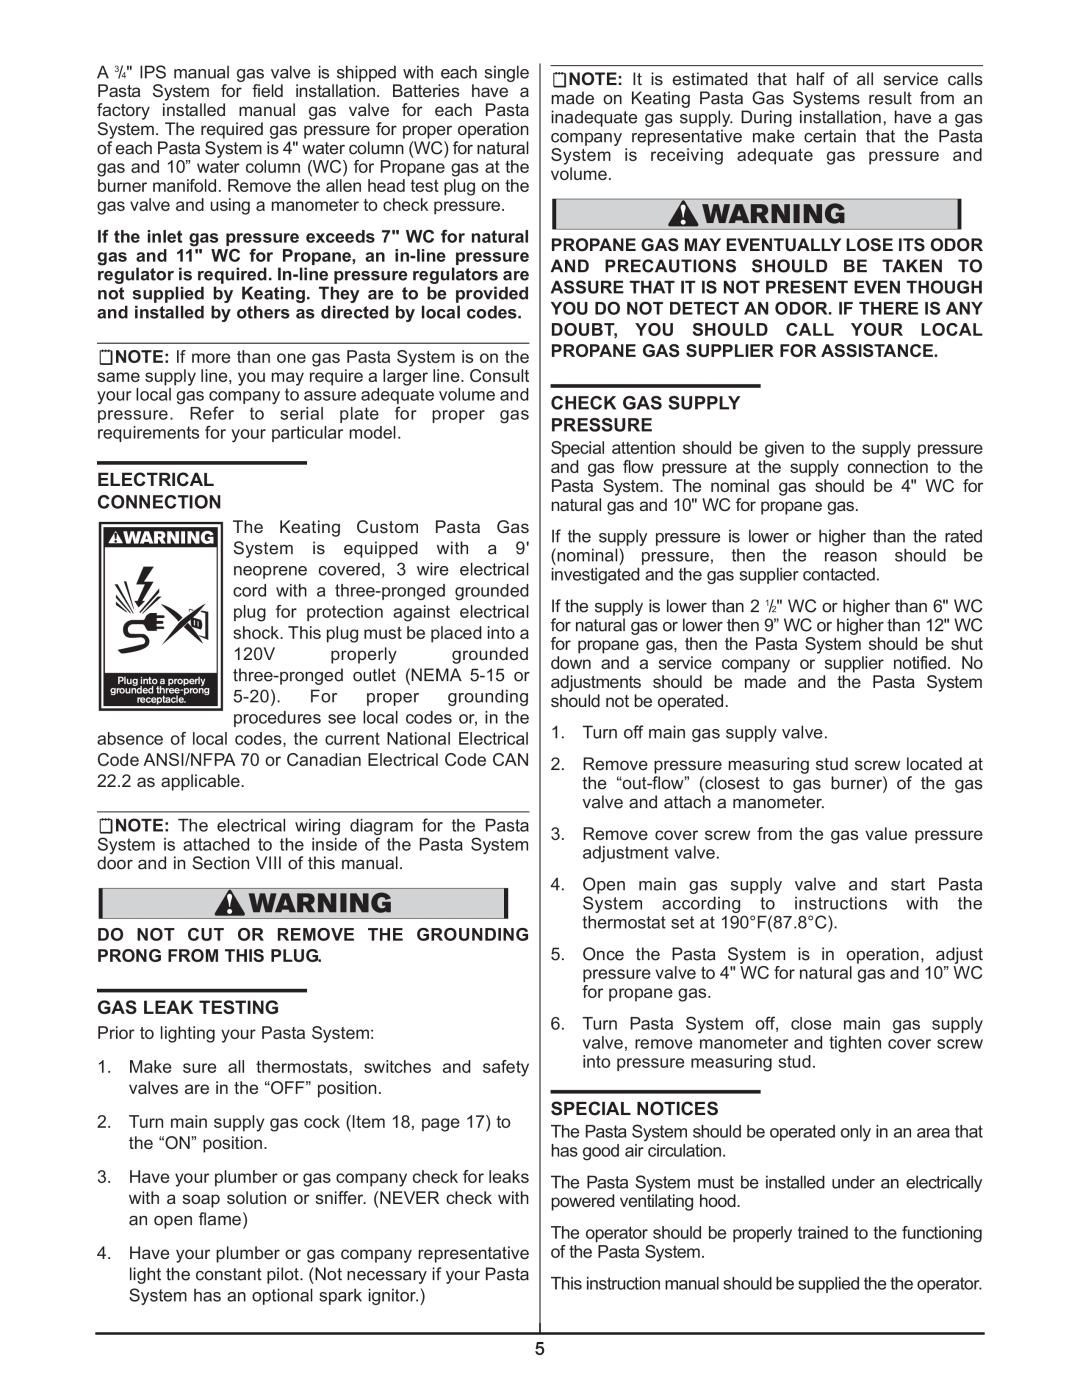 Keating Of Chicago 0107 service manual Gas Leak Testing, Check Gas Supply Pressure, Special Notices 